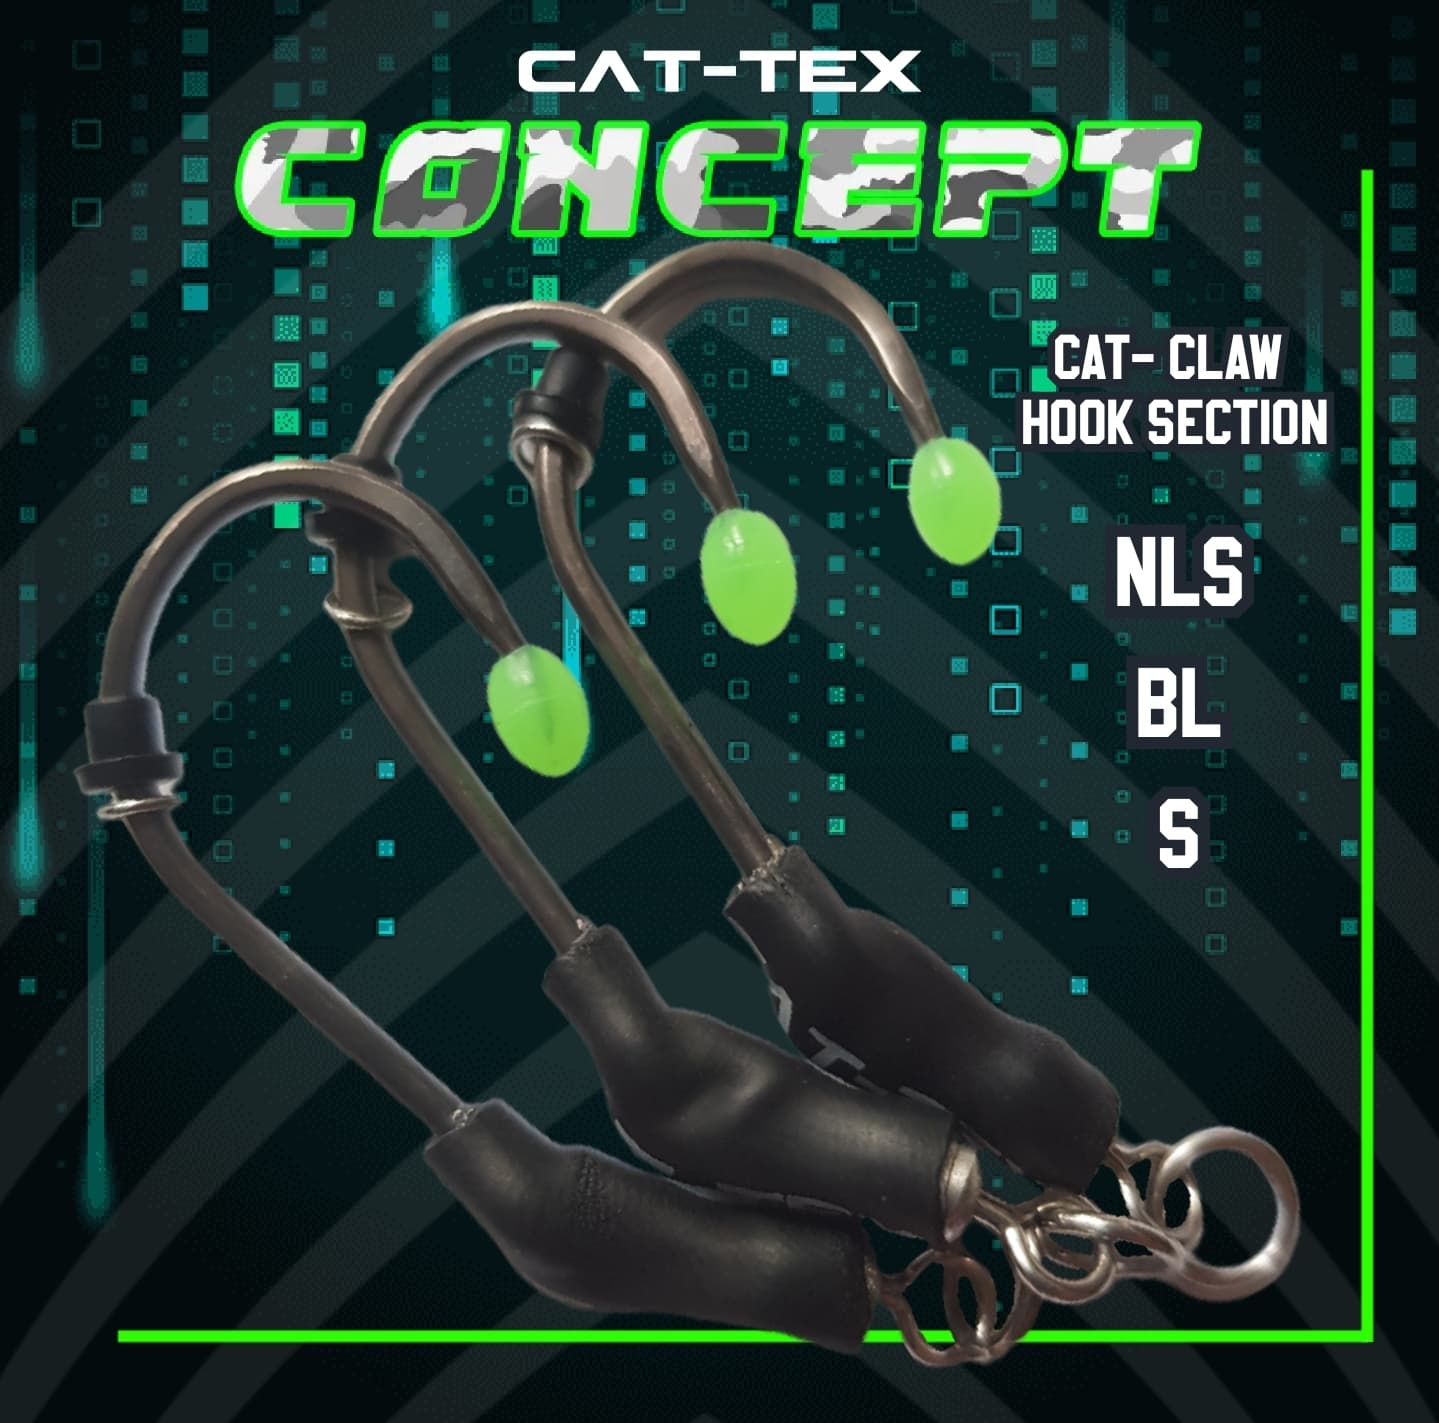 CAT-CLAW hook section - CAT-TEX